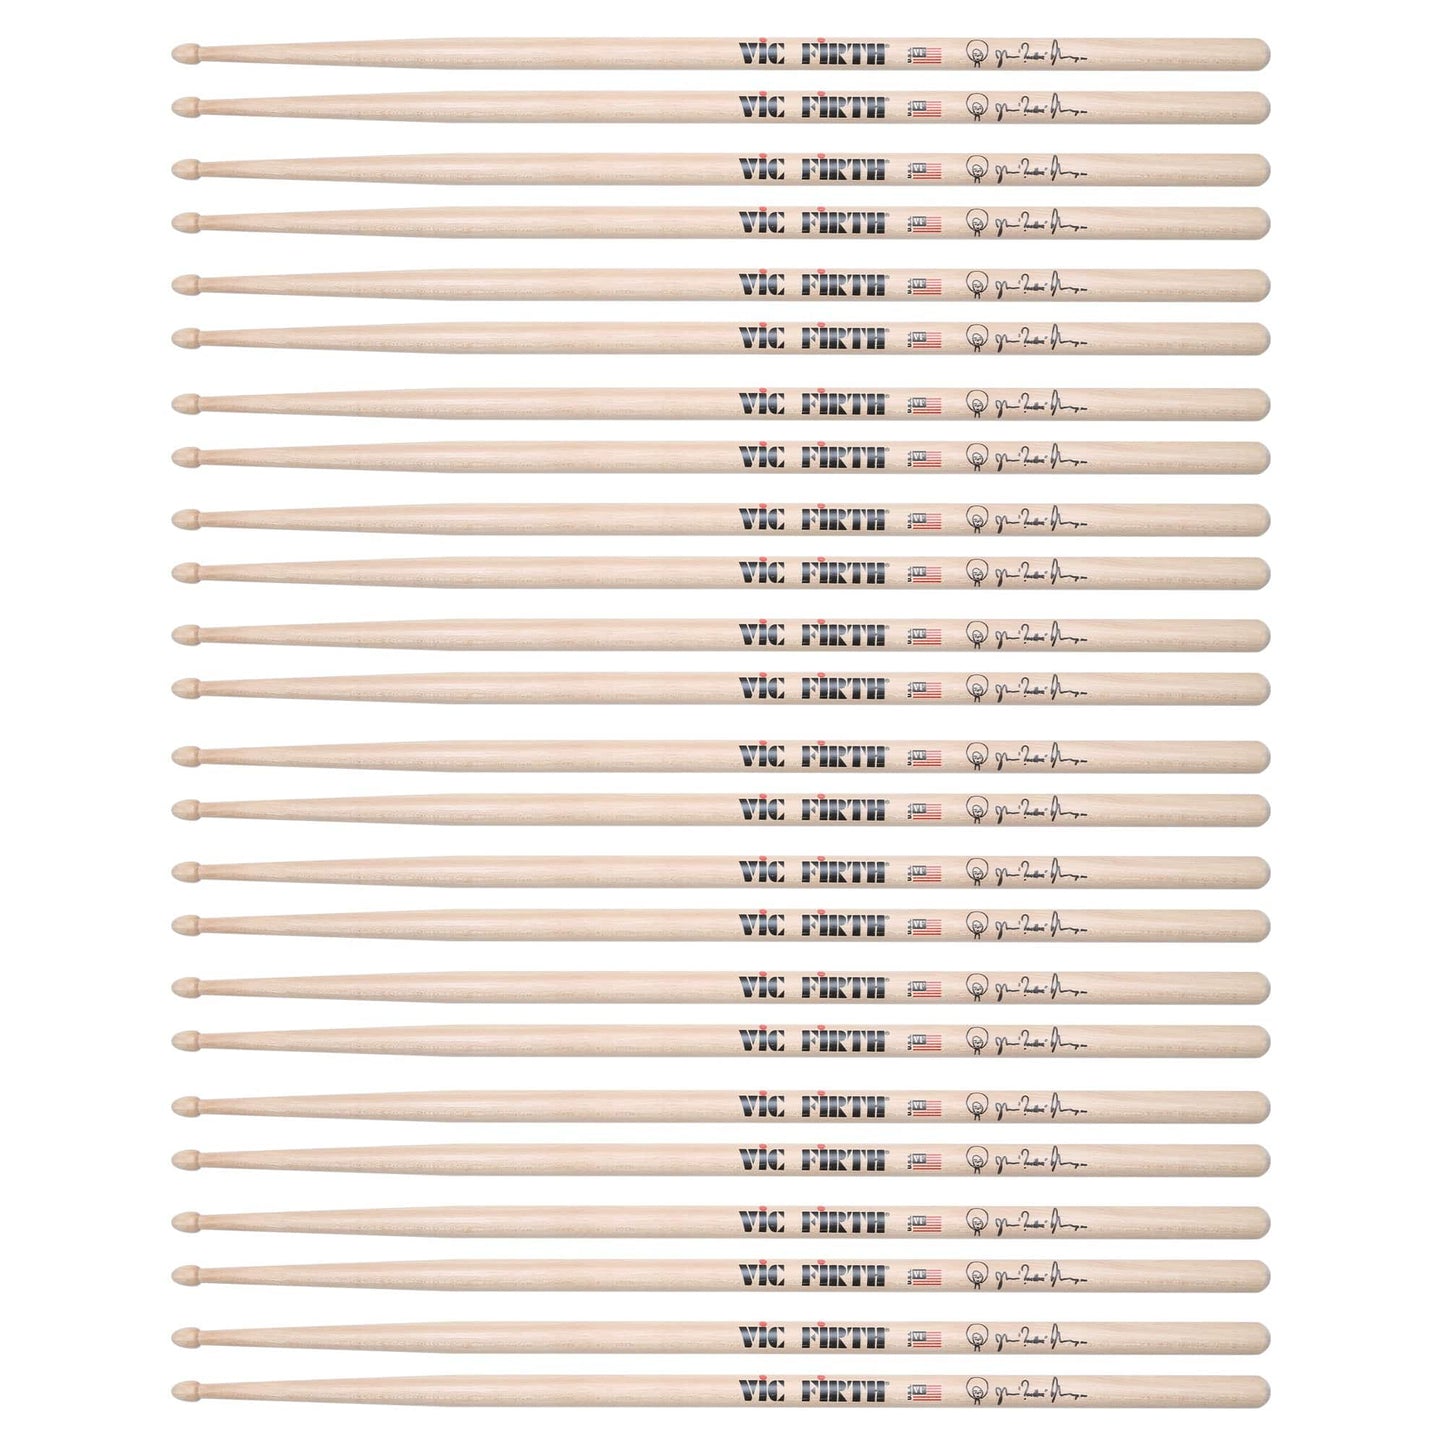 Vic Firth Questlove Natural Drum Sticks (12 Pair Bundle) Drums and Percussion / Parts and Accessories / Drum Sticks and Mallets